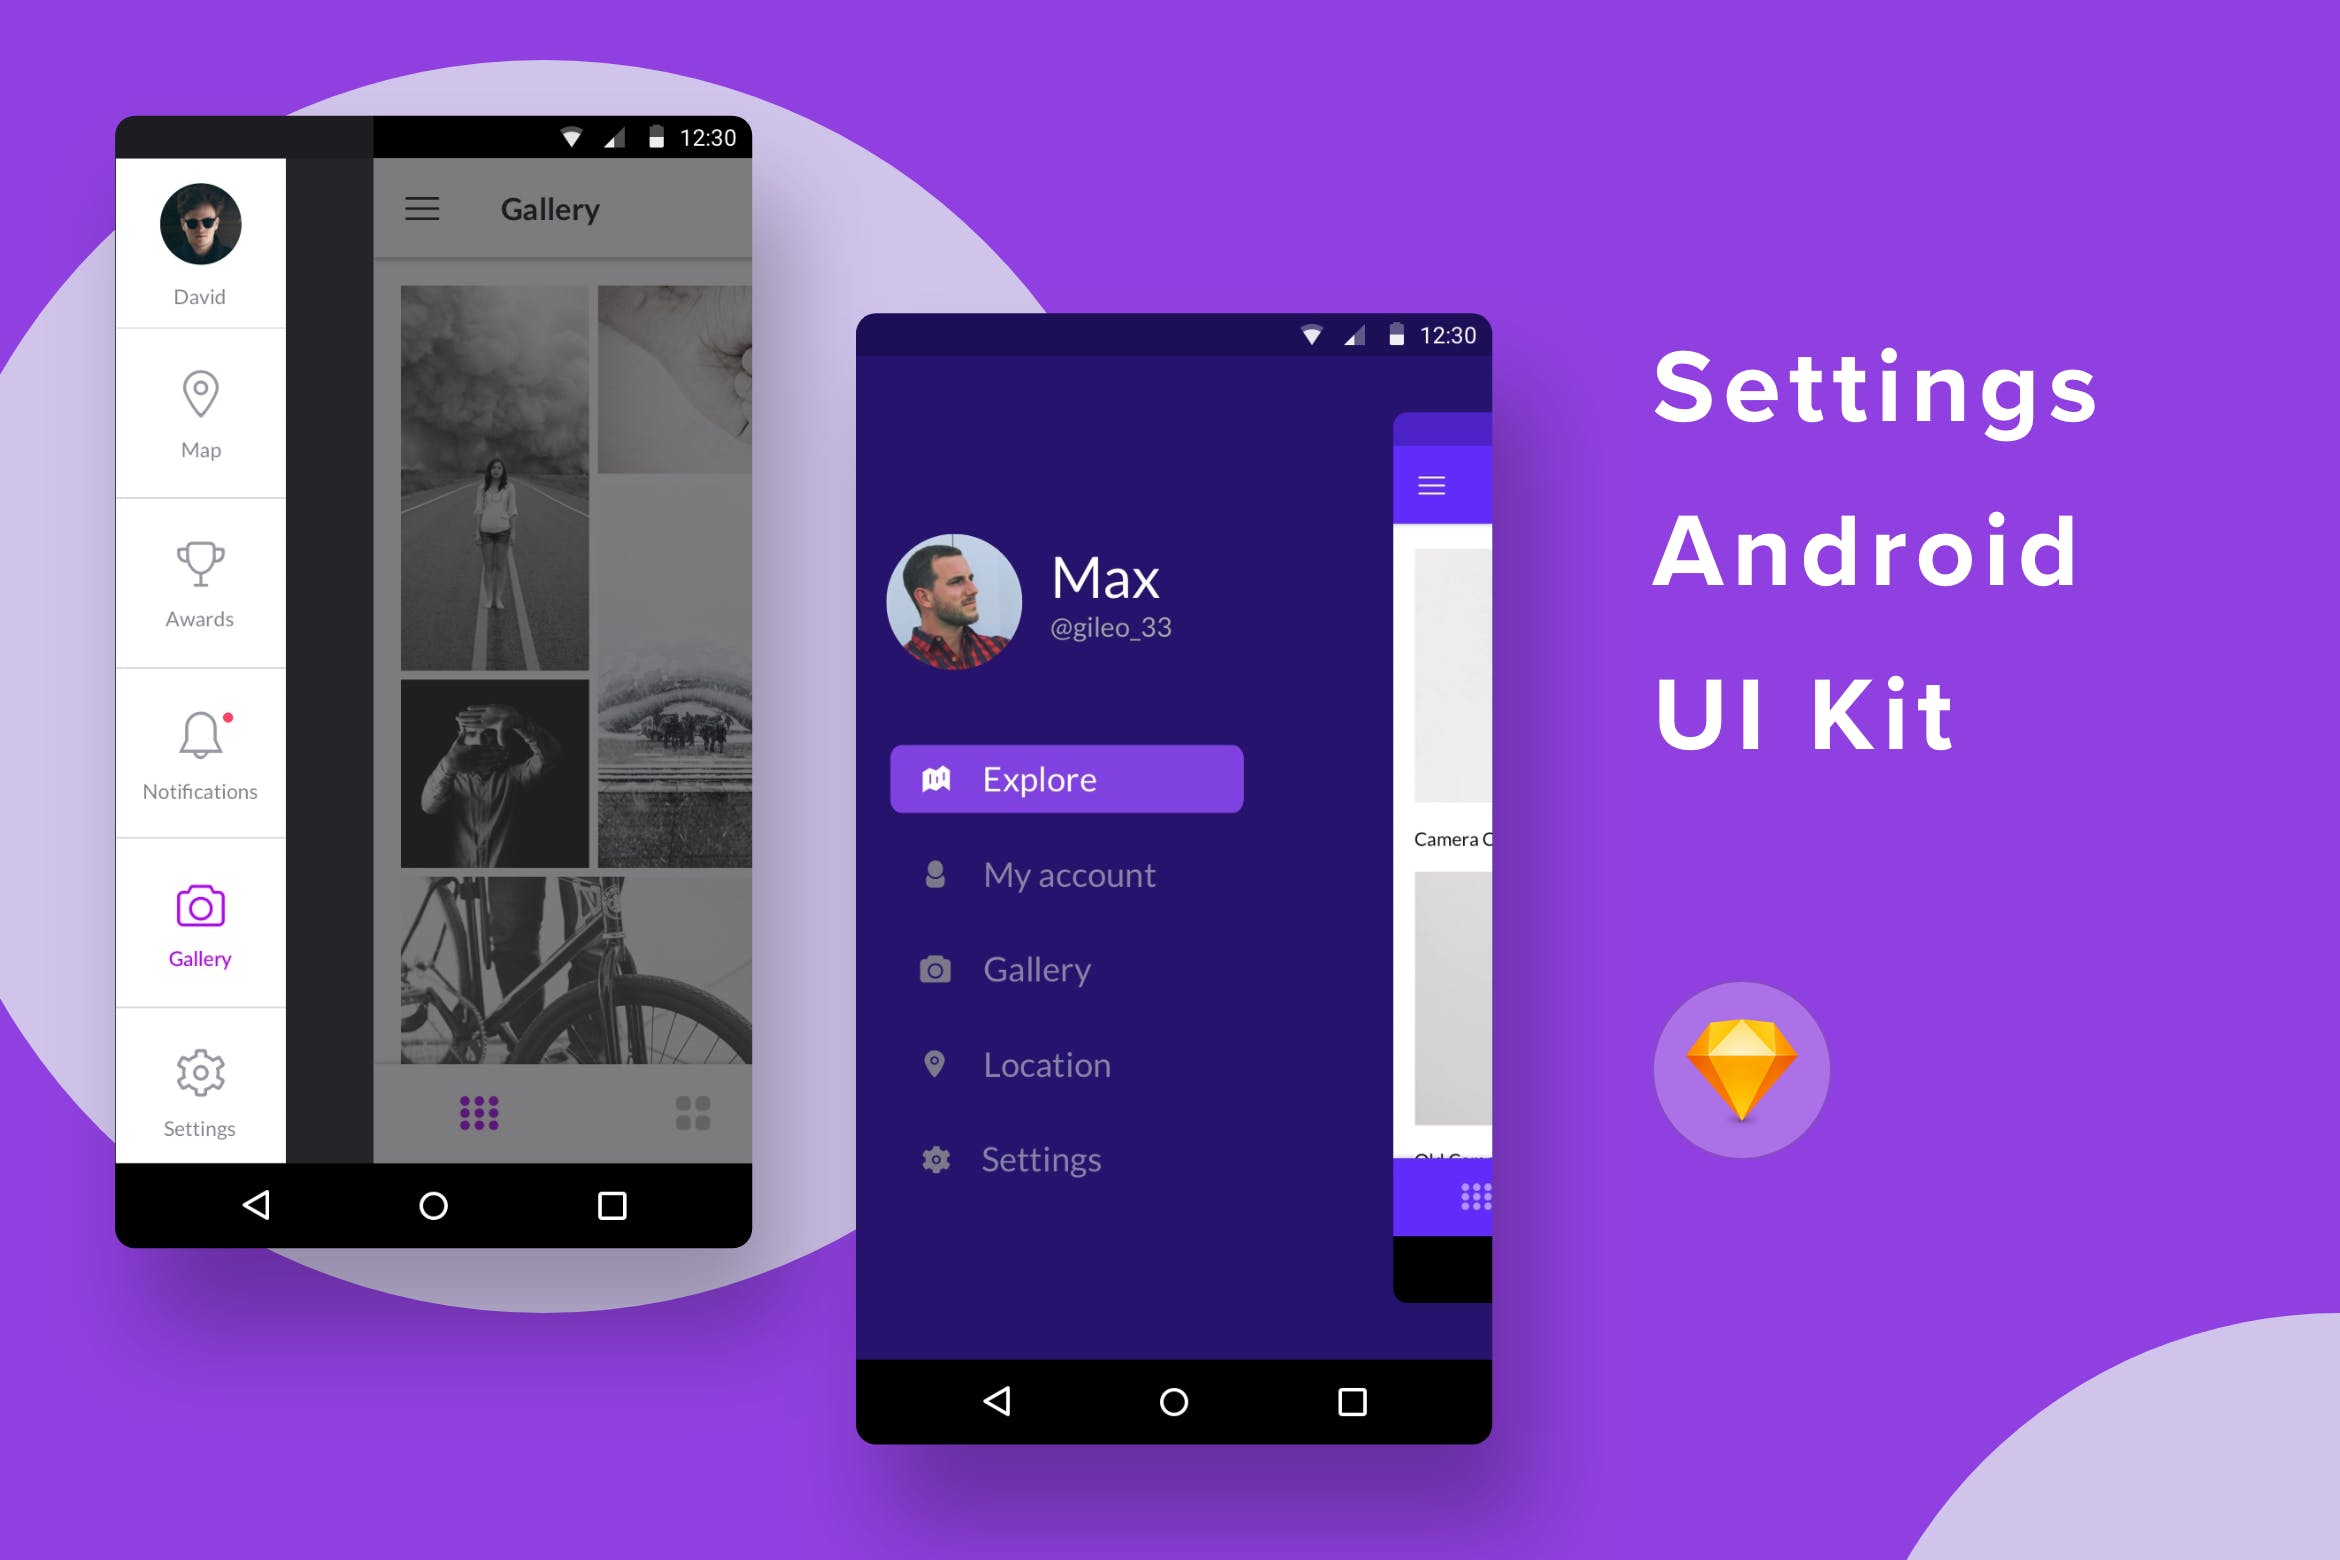 Android应用用户中心界面设计SKETCH模板 Settings Android UI Kit (Sketch)插图